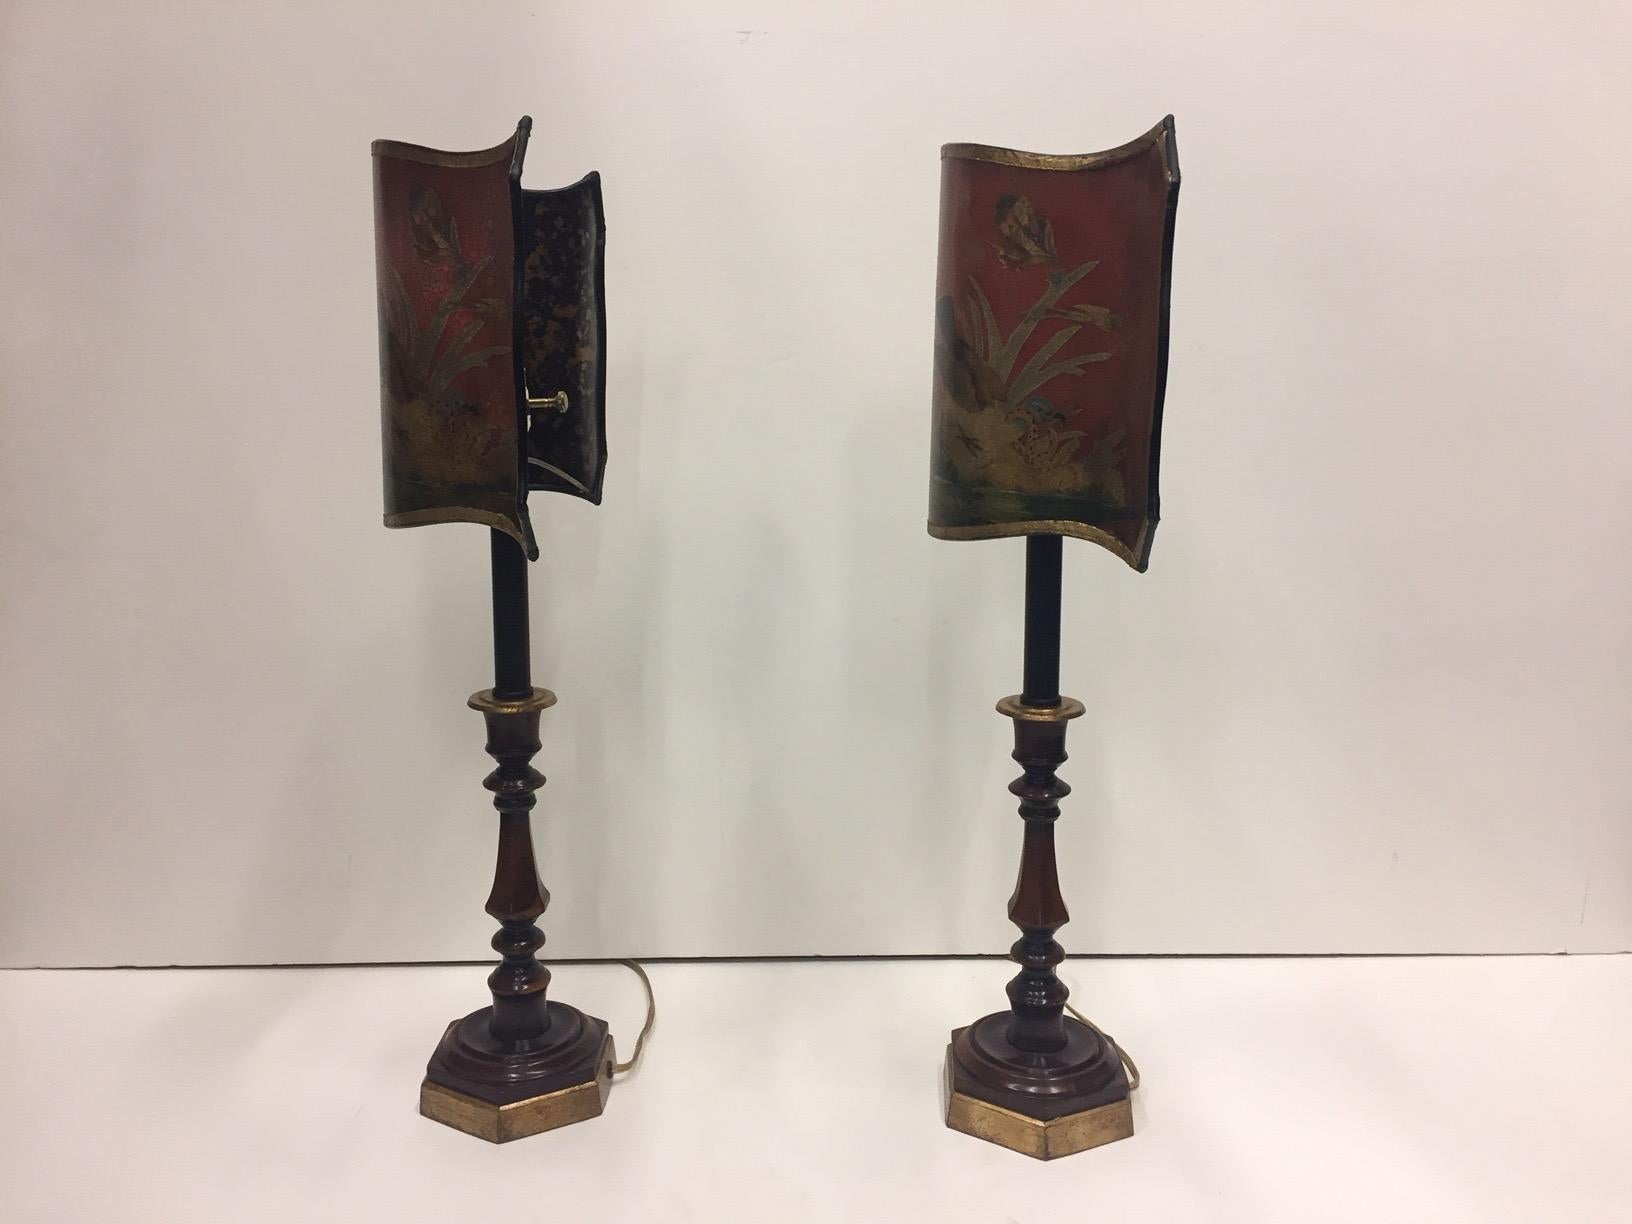 A wonderfully decorative pair of dark red candlestick lamps having gold embellishments and marvelously undulating decoupage shades with birds and foliage.
Shades are not removeable.